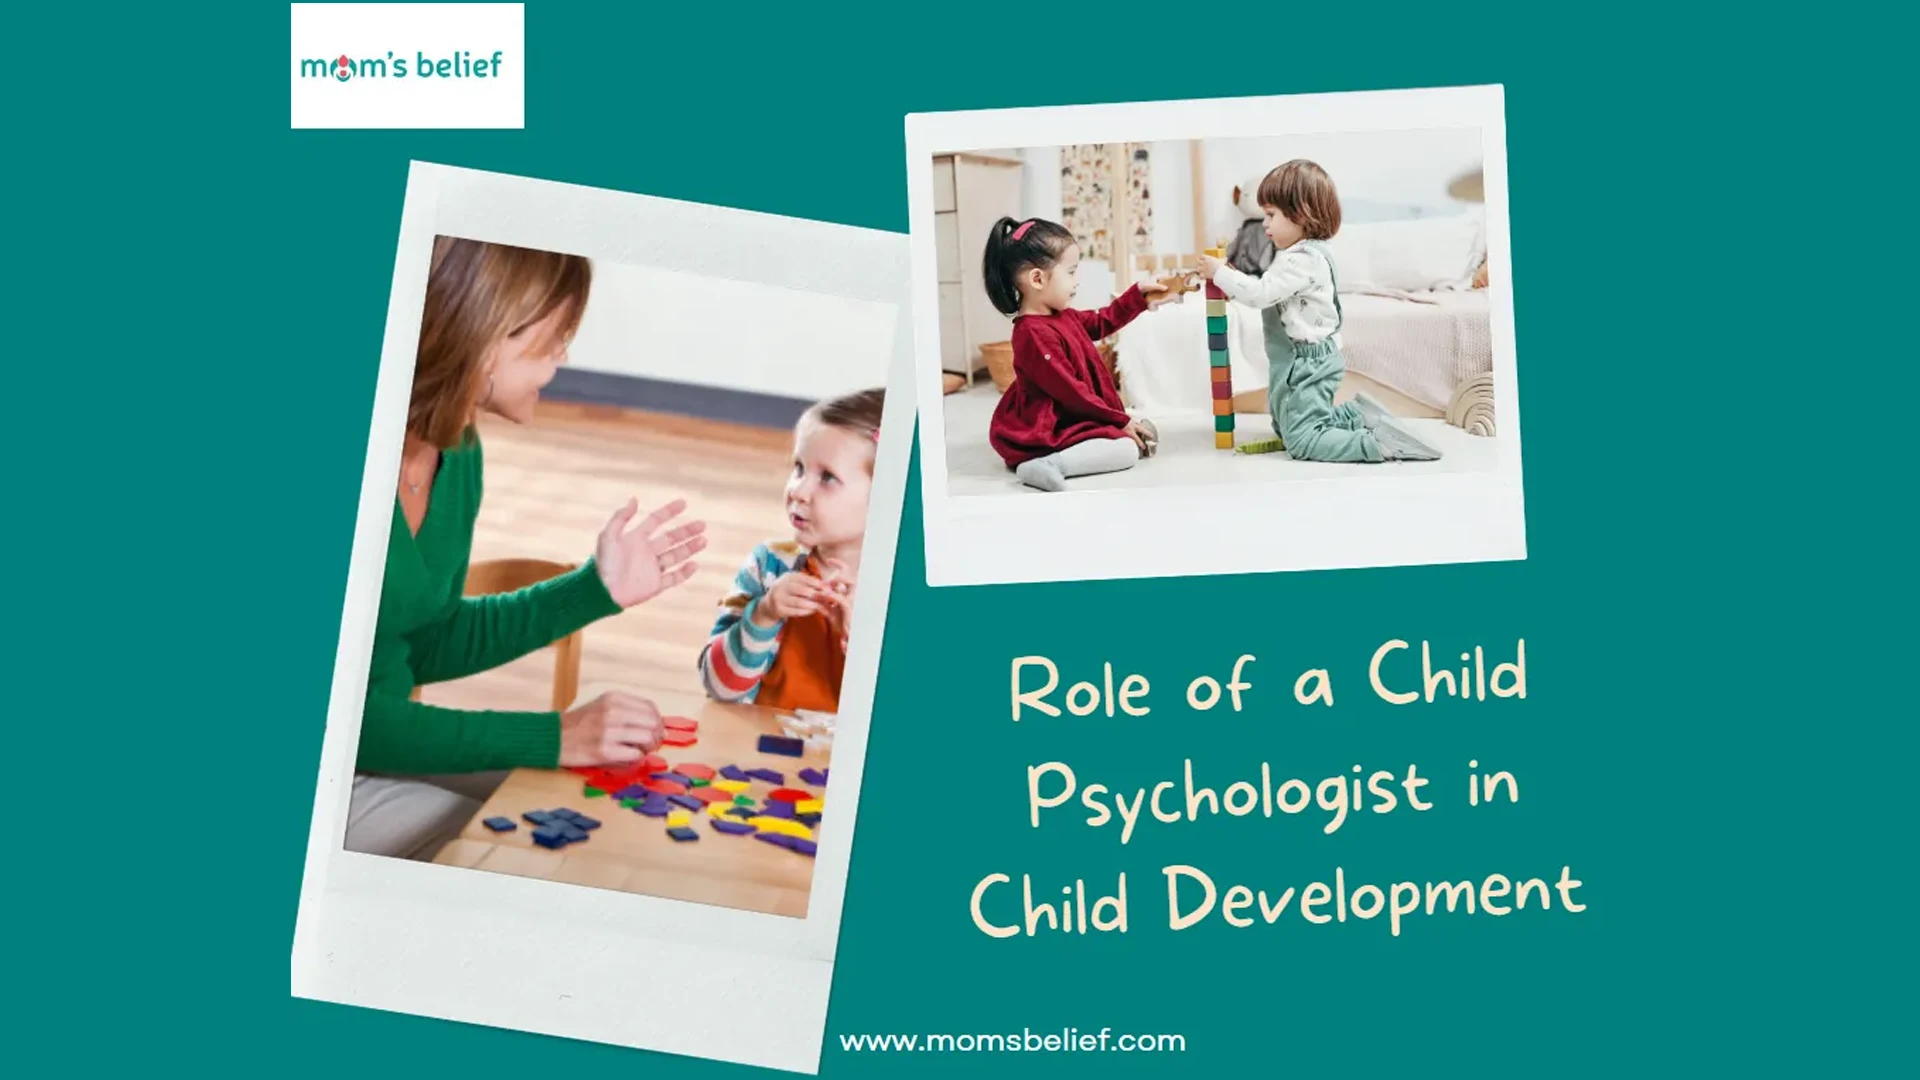 Role of a Child Psychologist in Child Development